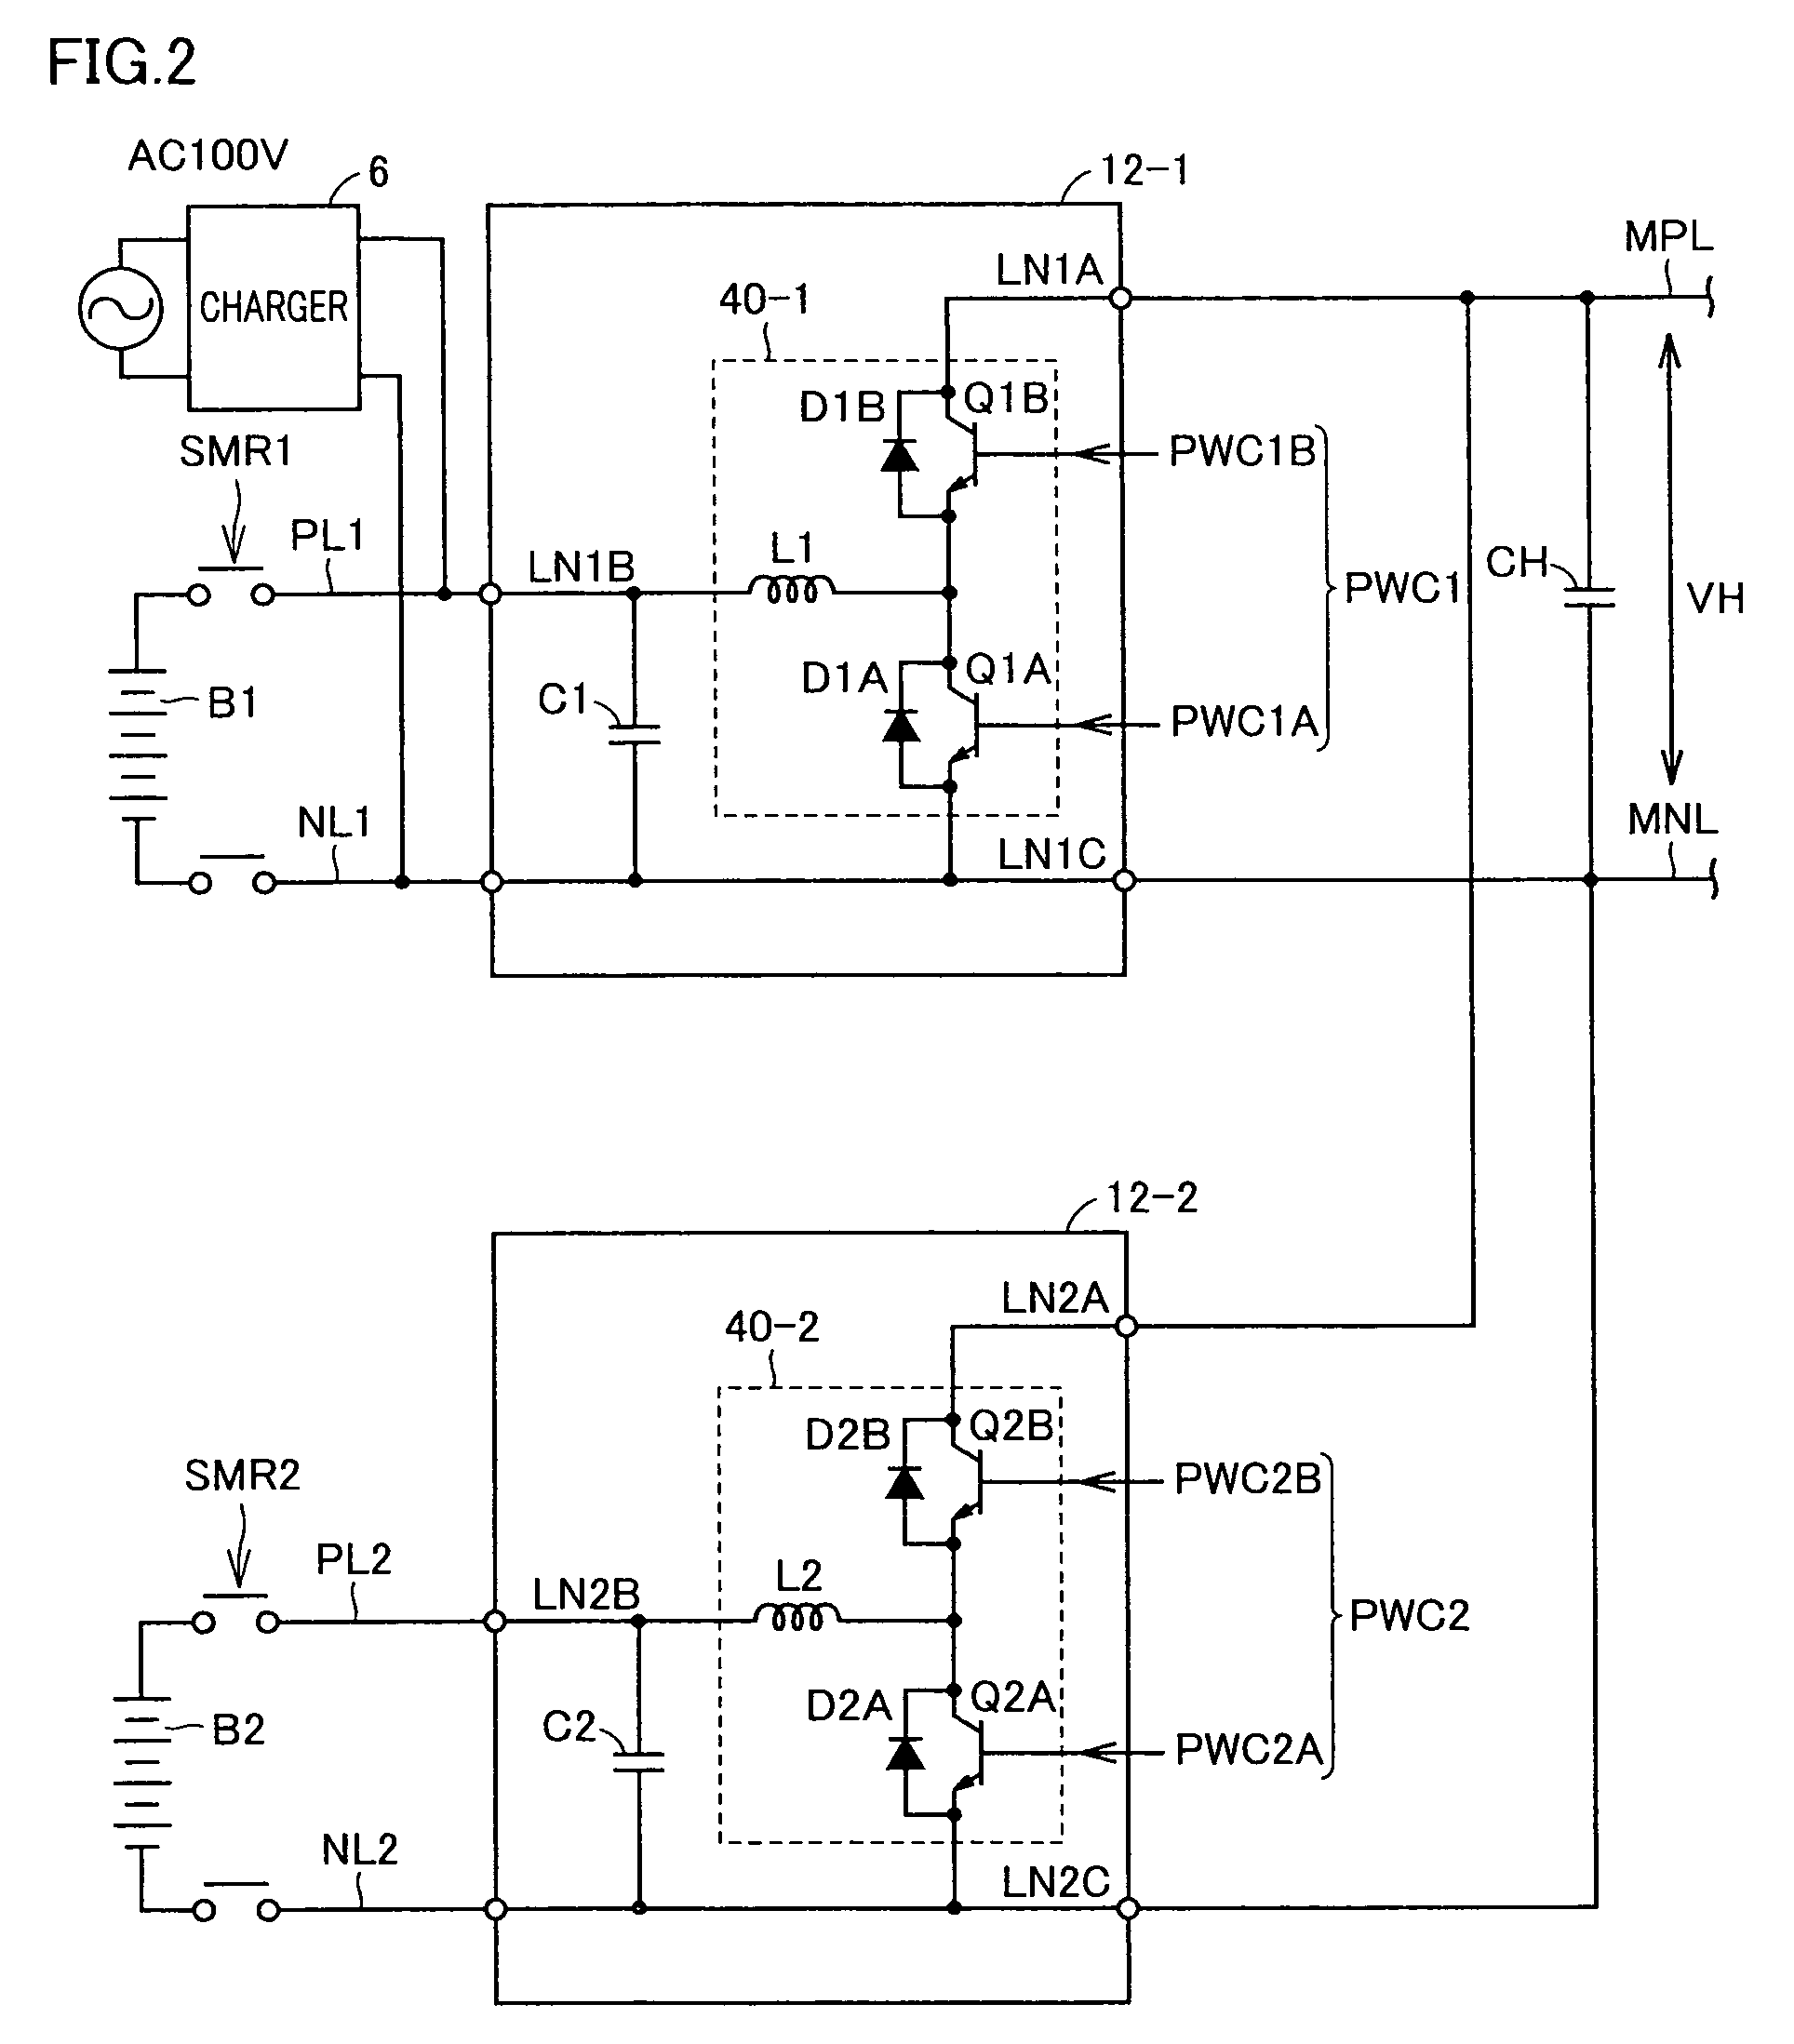 Vehicle having power storage devices and charging line for supplying electric power provided from outside vehicle